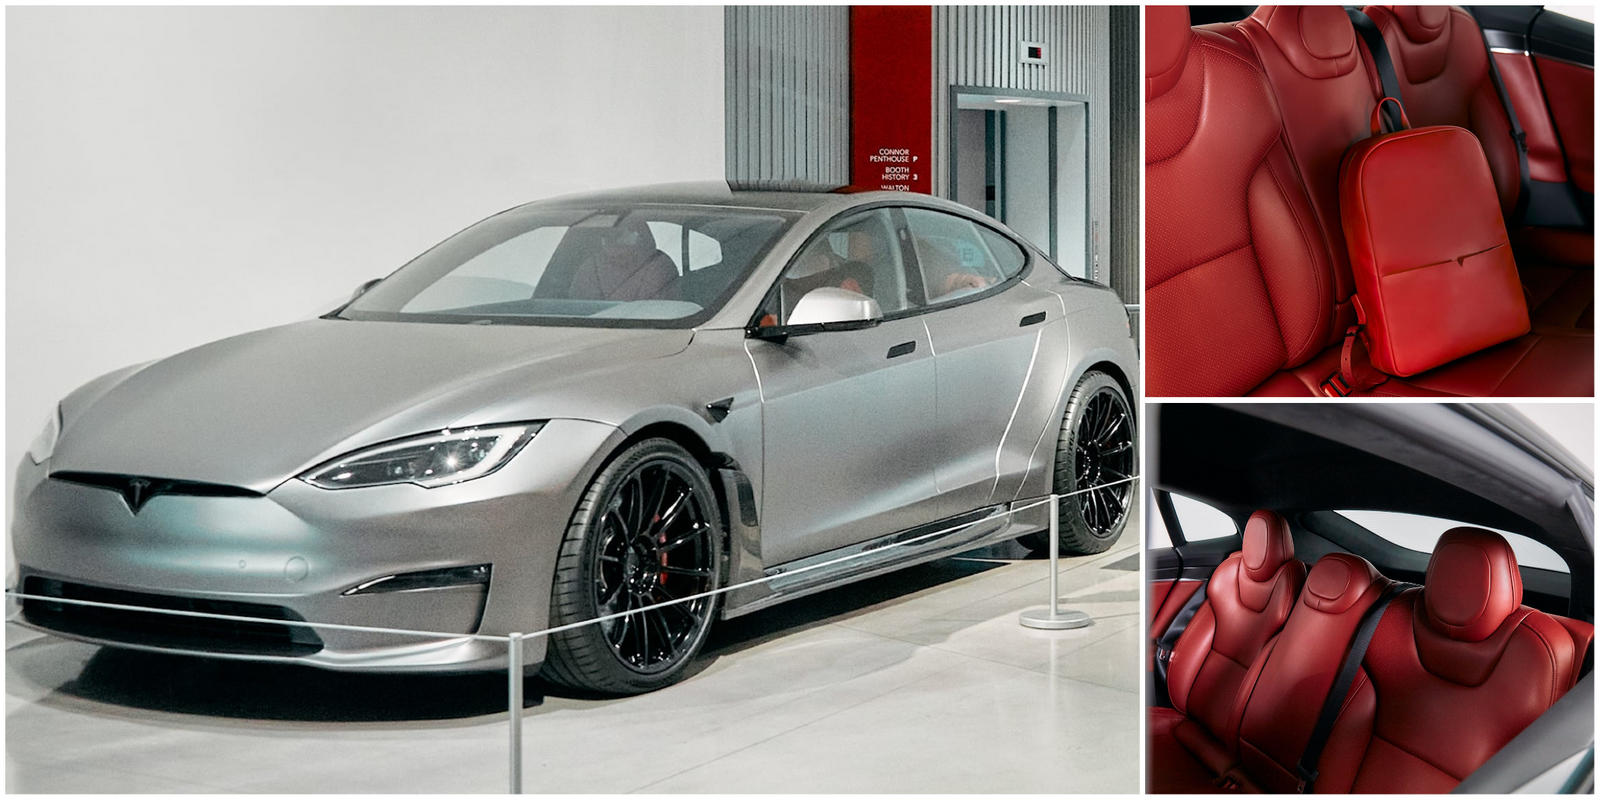 This one-of-a-kind Tesla Model S has a $30,000 vegan leather interior made  out of recycled bamboo - Luxurylaunches